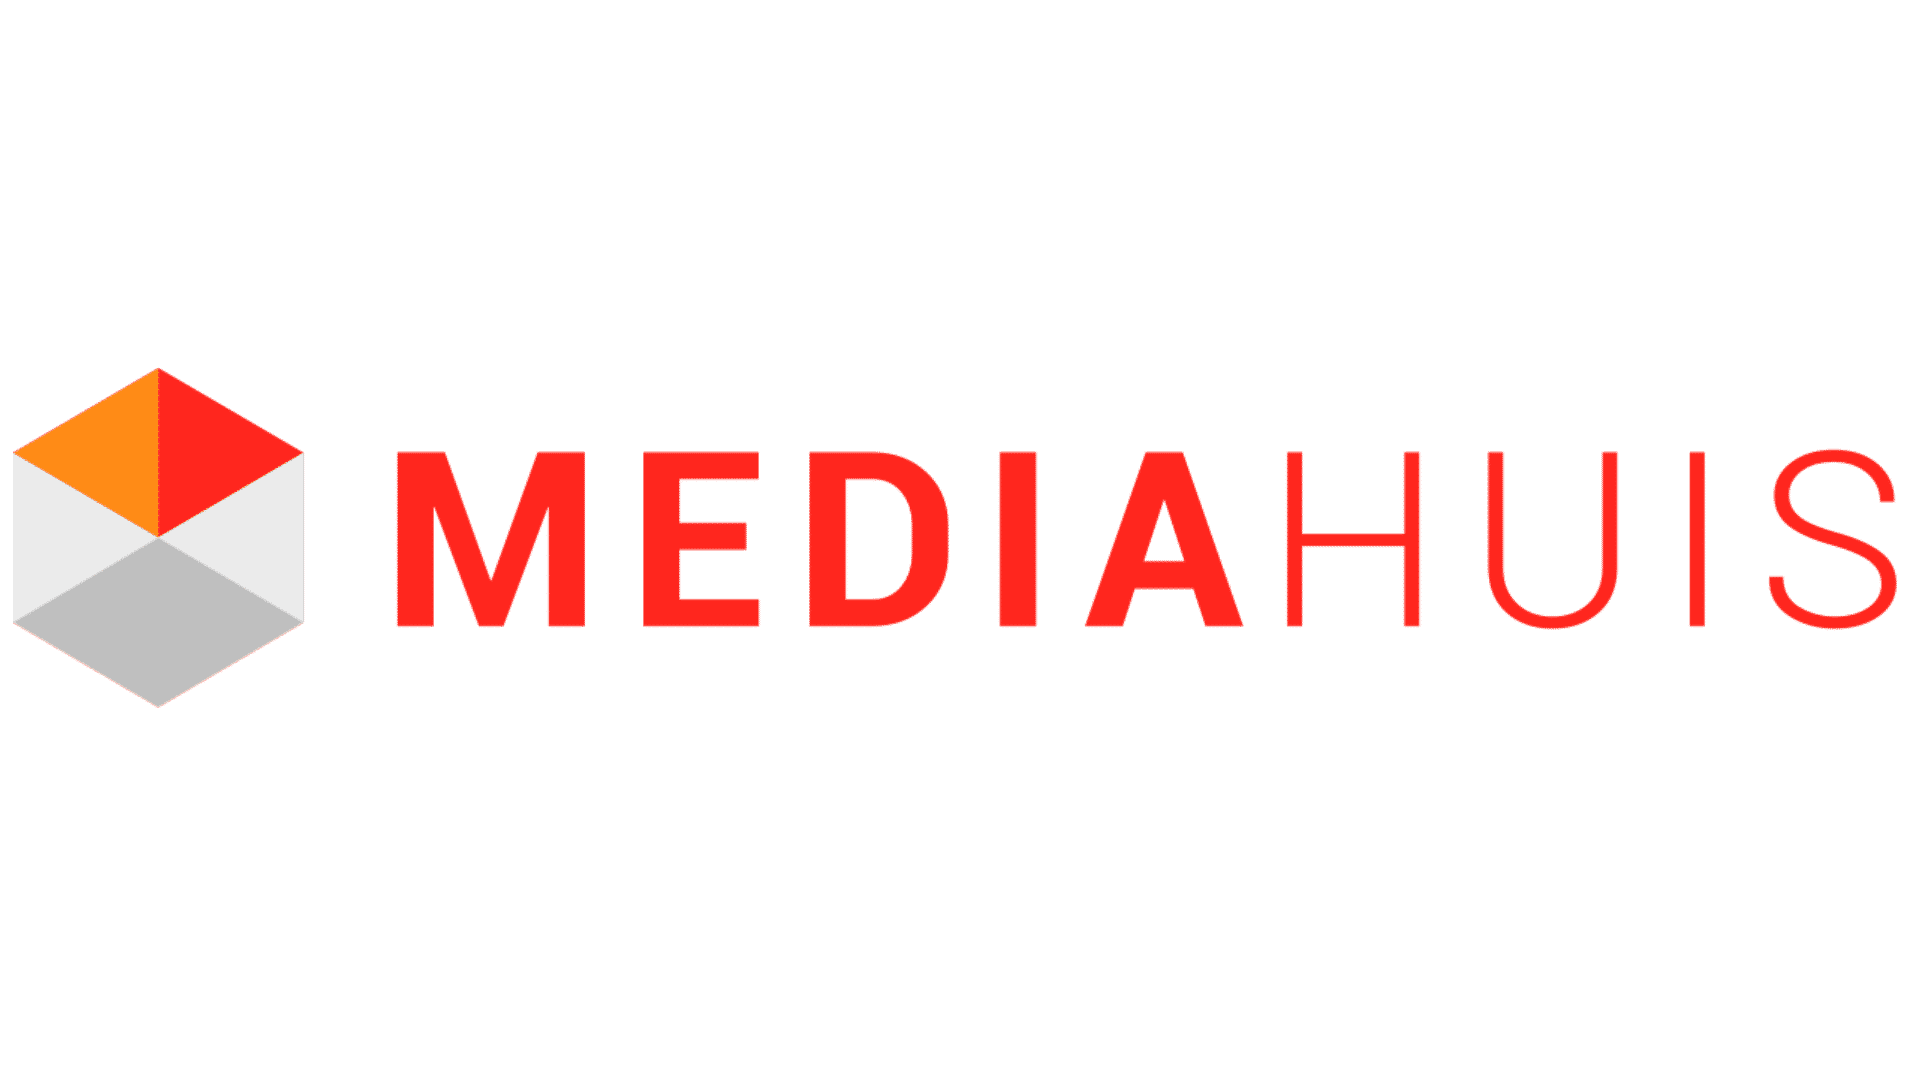 Chief Digital Officer at Independent News & Media (now Mediahuis)